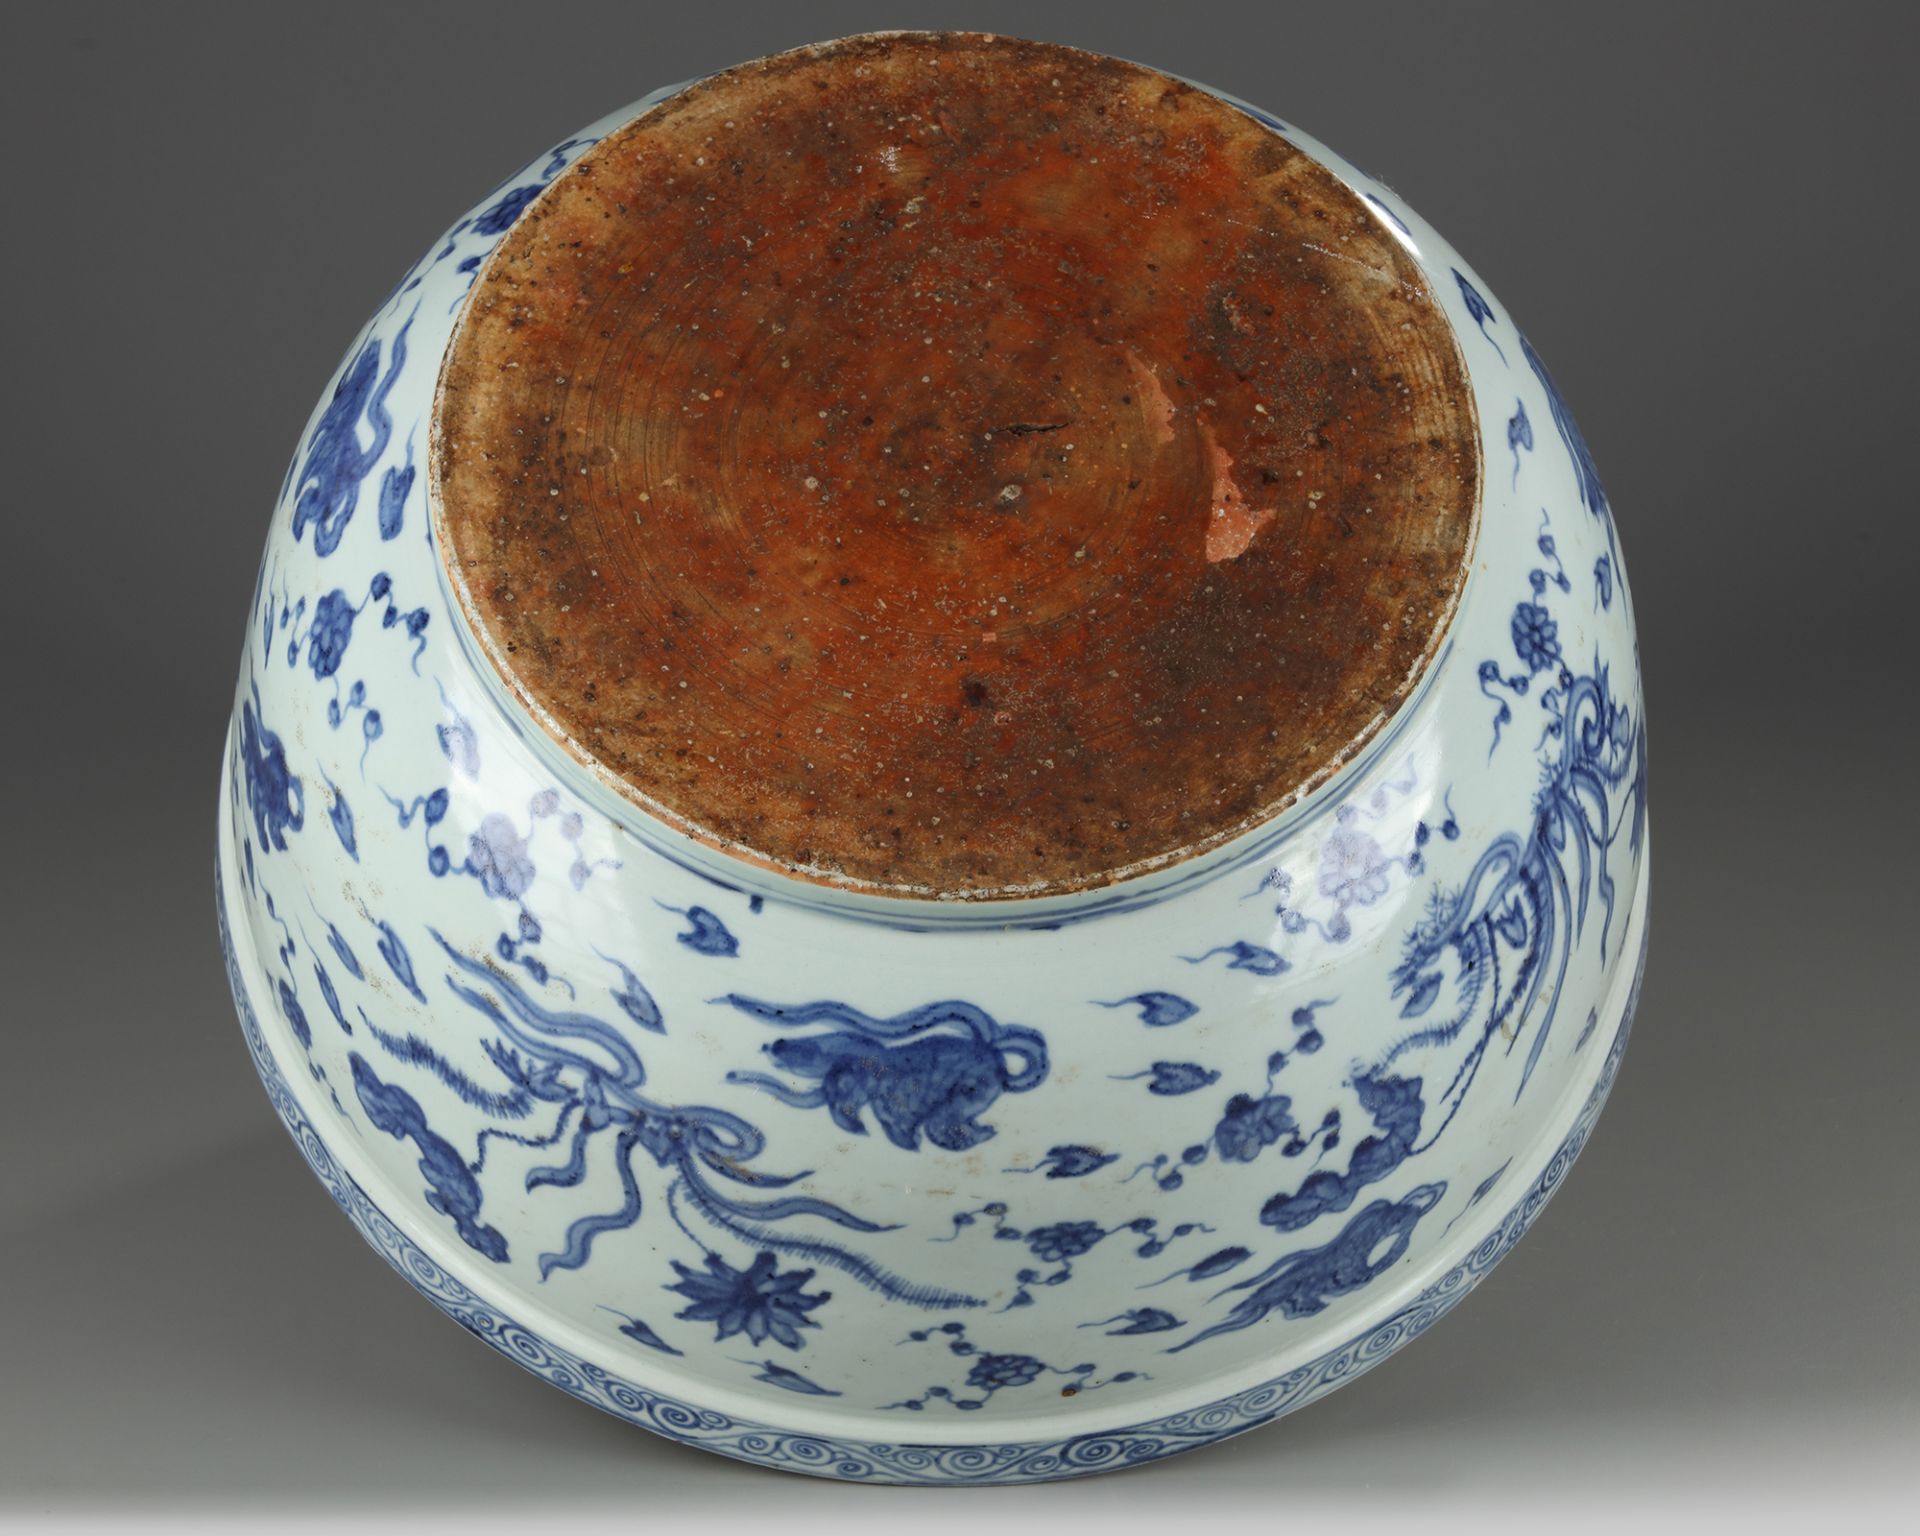 A CHINESE BLUE AND WHITE DUCKS AND LOTUS' BASIN, MING DYNASTY (1368-1644) - Image 6 of 6